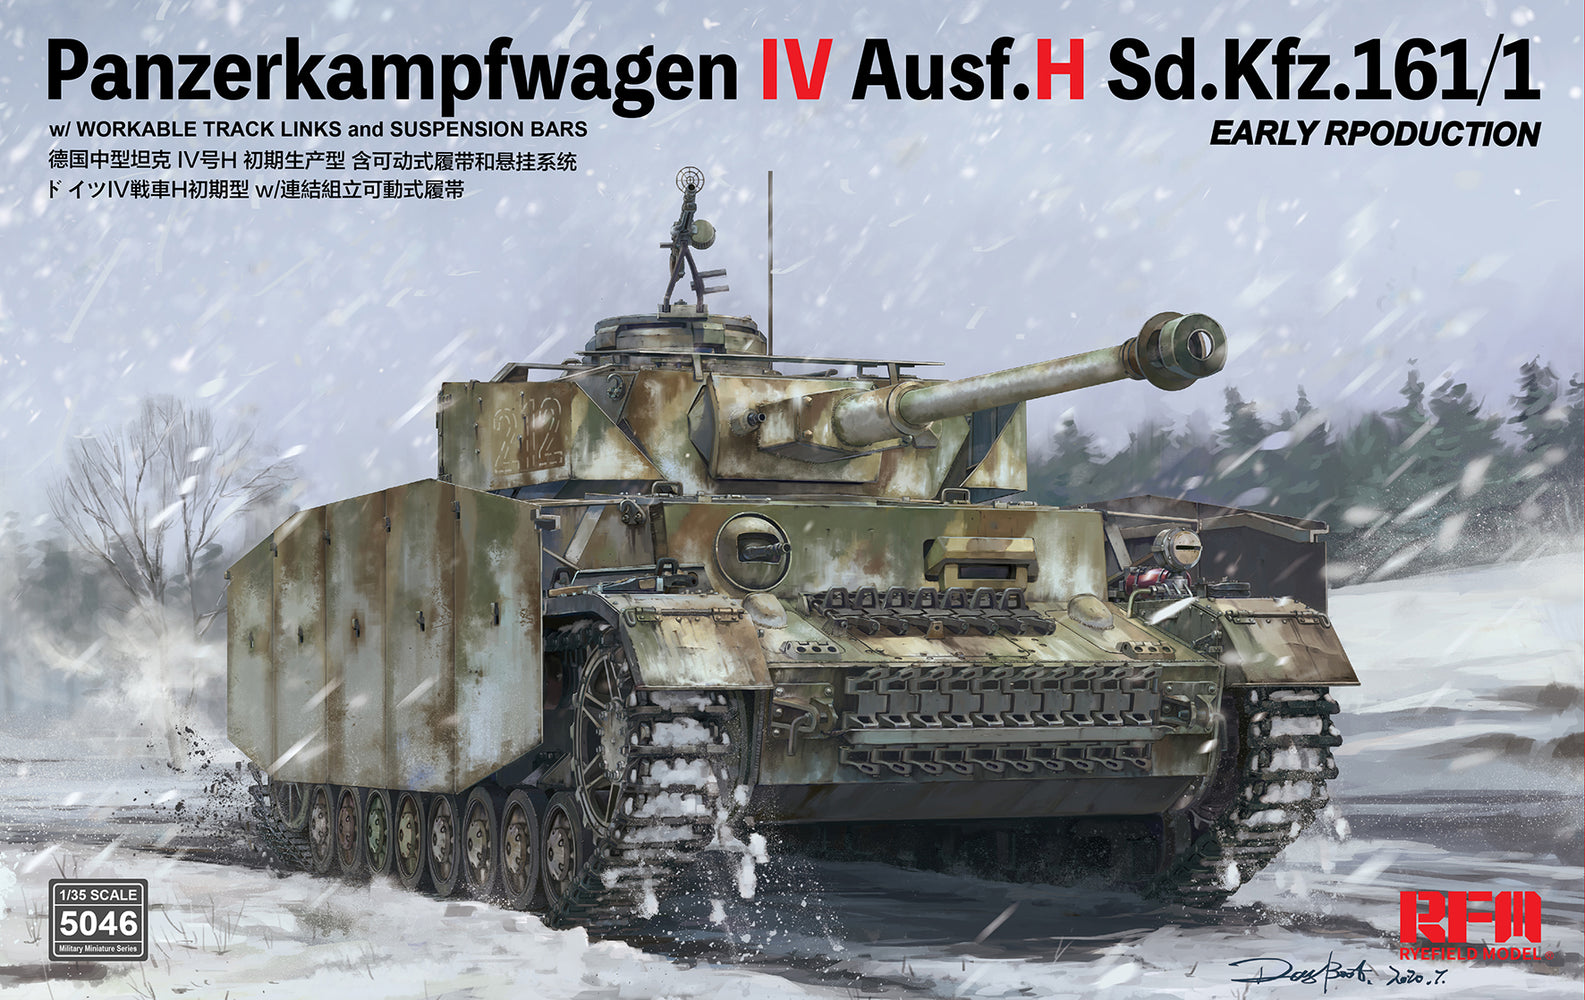 1/35 Pz.kpfw.IV Ausf.H Sd.Kfz 161/1 Early Production w/Workable Track Links by RyeField